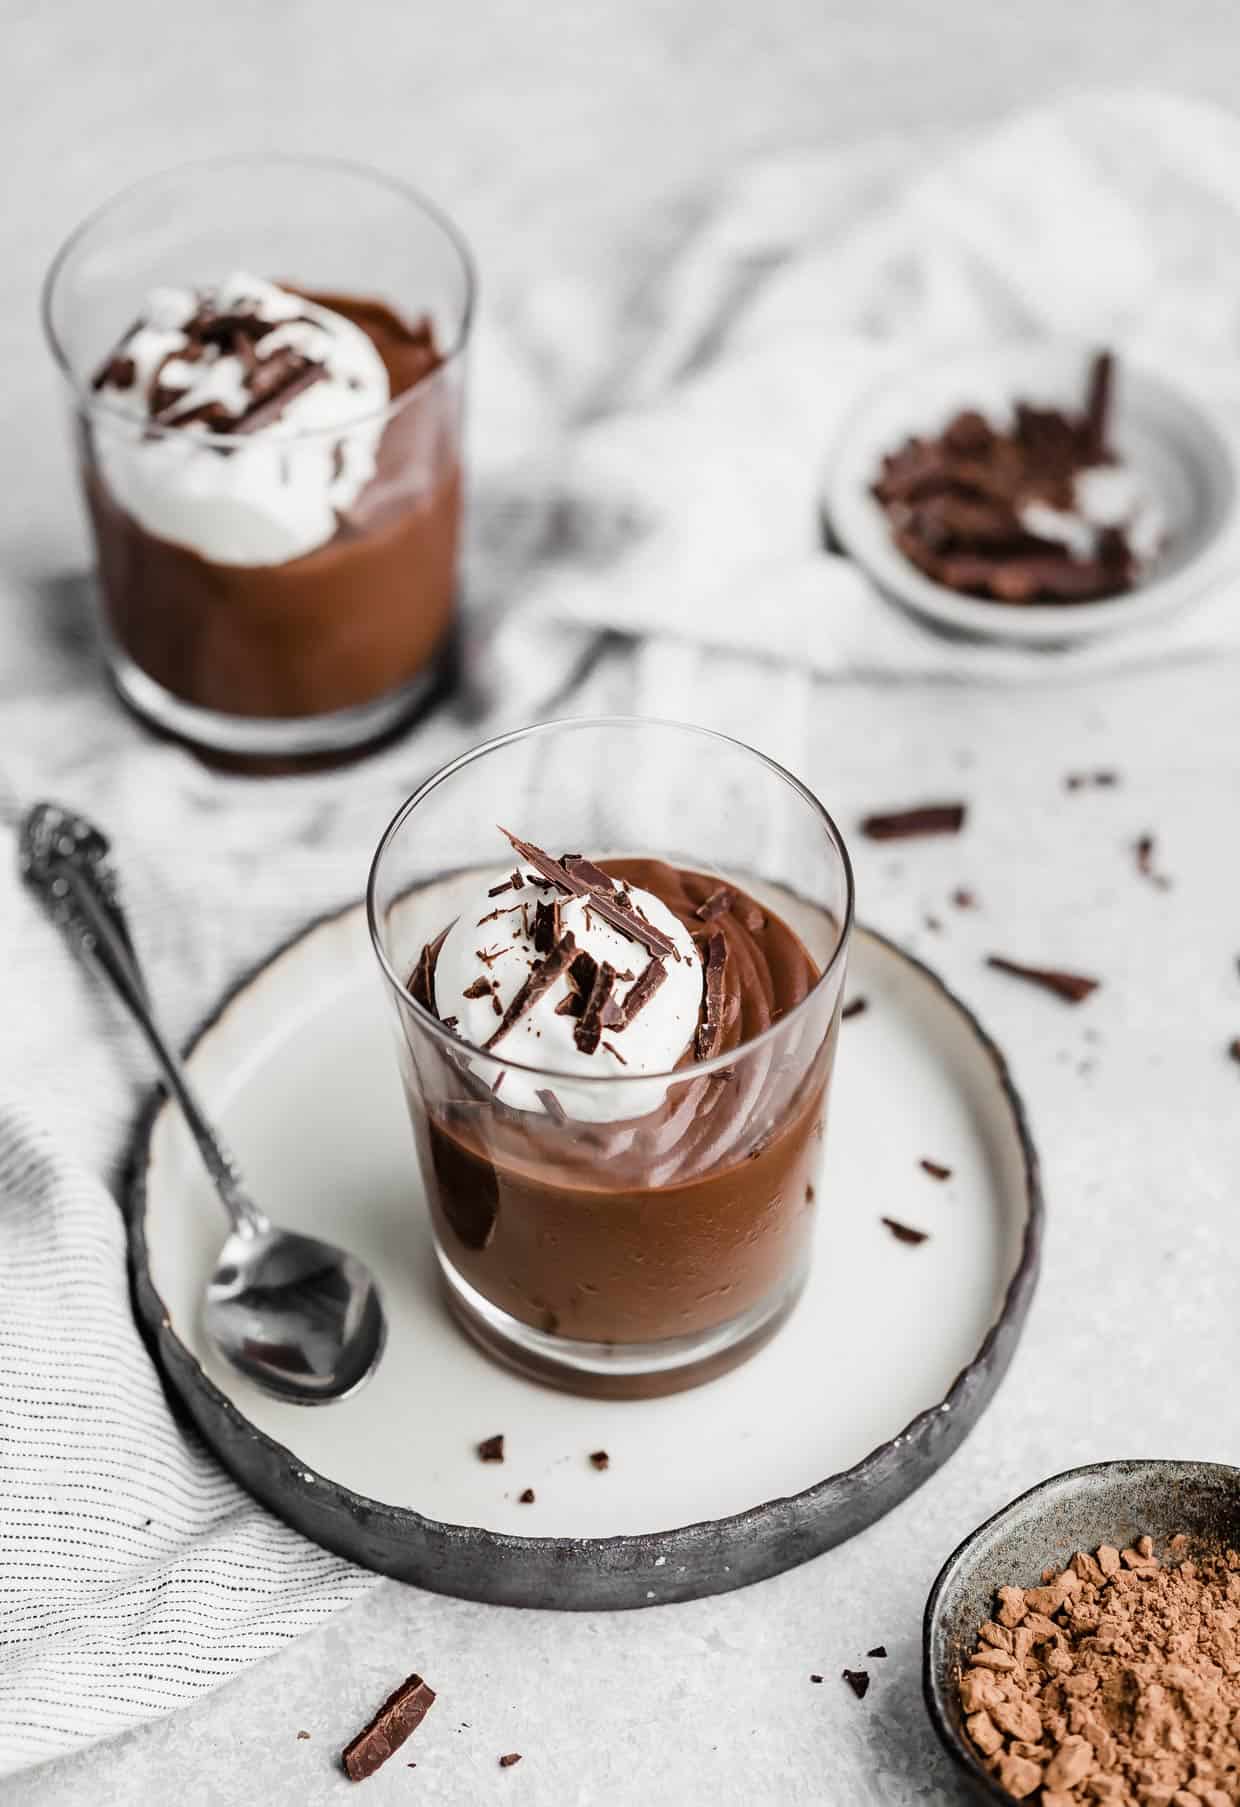 Homemade Chocolate Pudding in a glass cup topped with whipped cream and chocolate shavings.